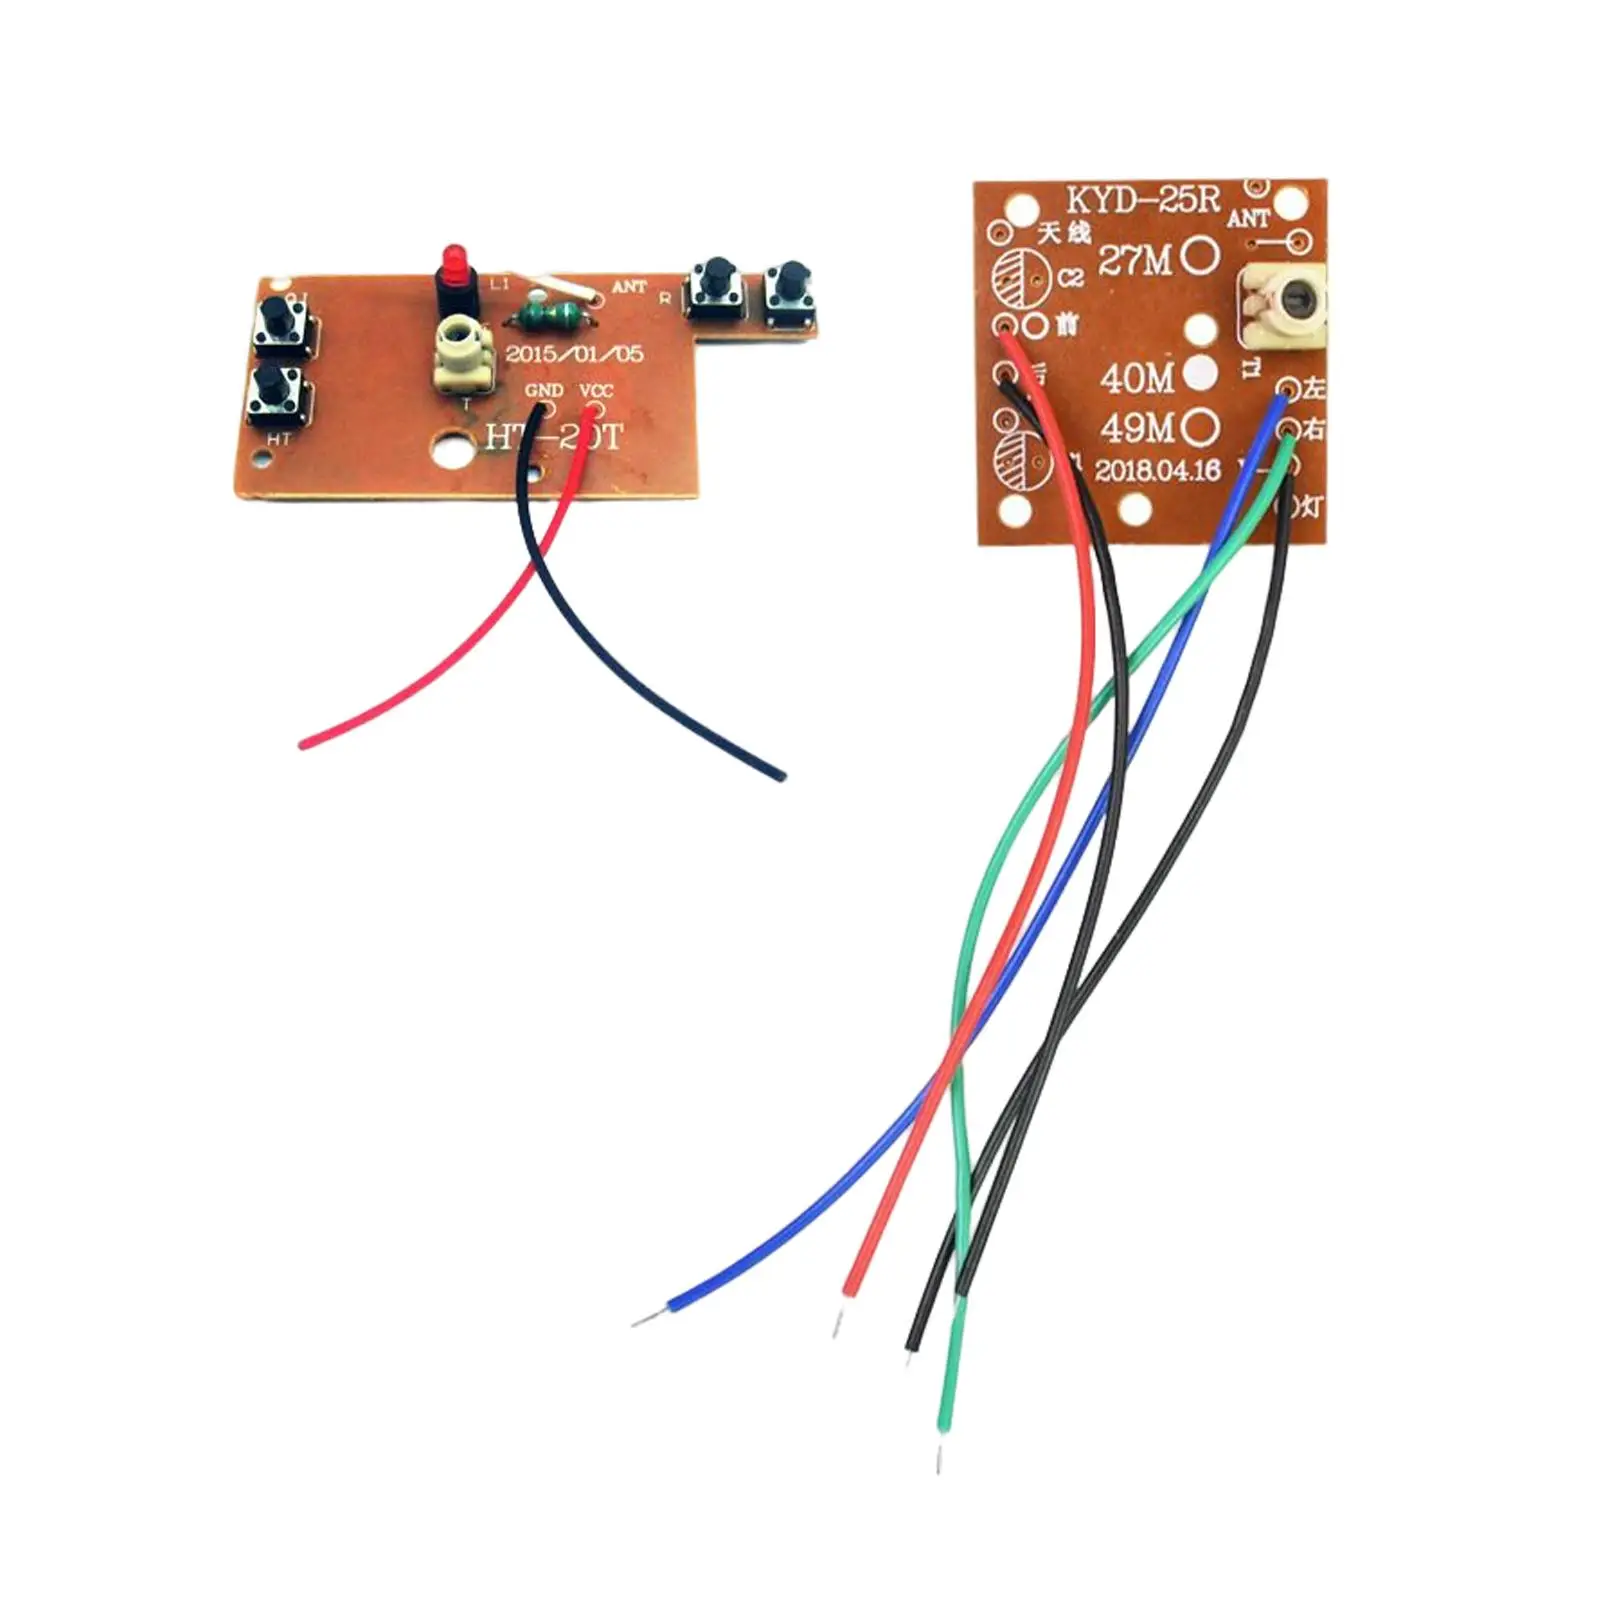 Trnsmitter Bord nd Receiver Bord Circuit Bord ccessories for RC Toy RC Replcement Prt 27MHz for RC Cr Prts Replcement